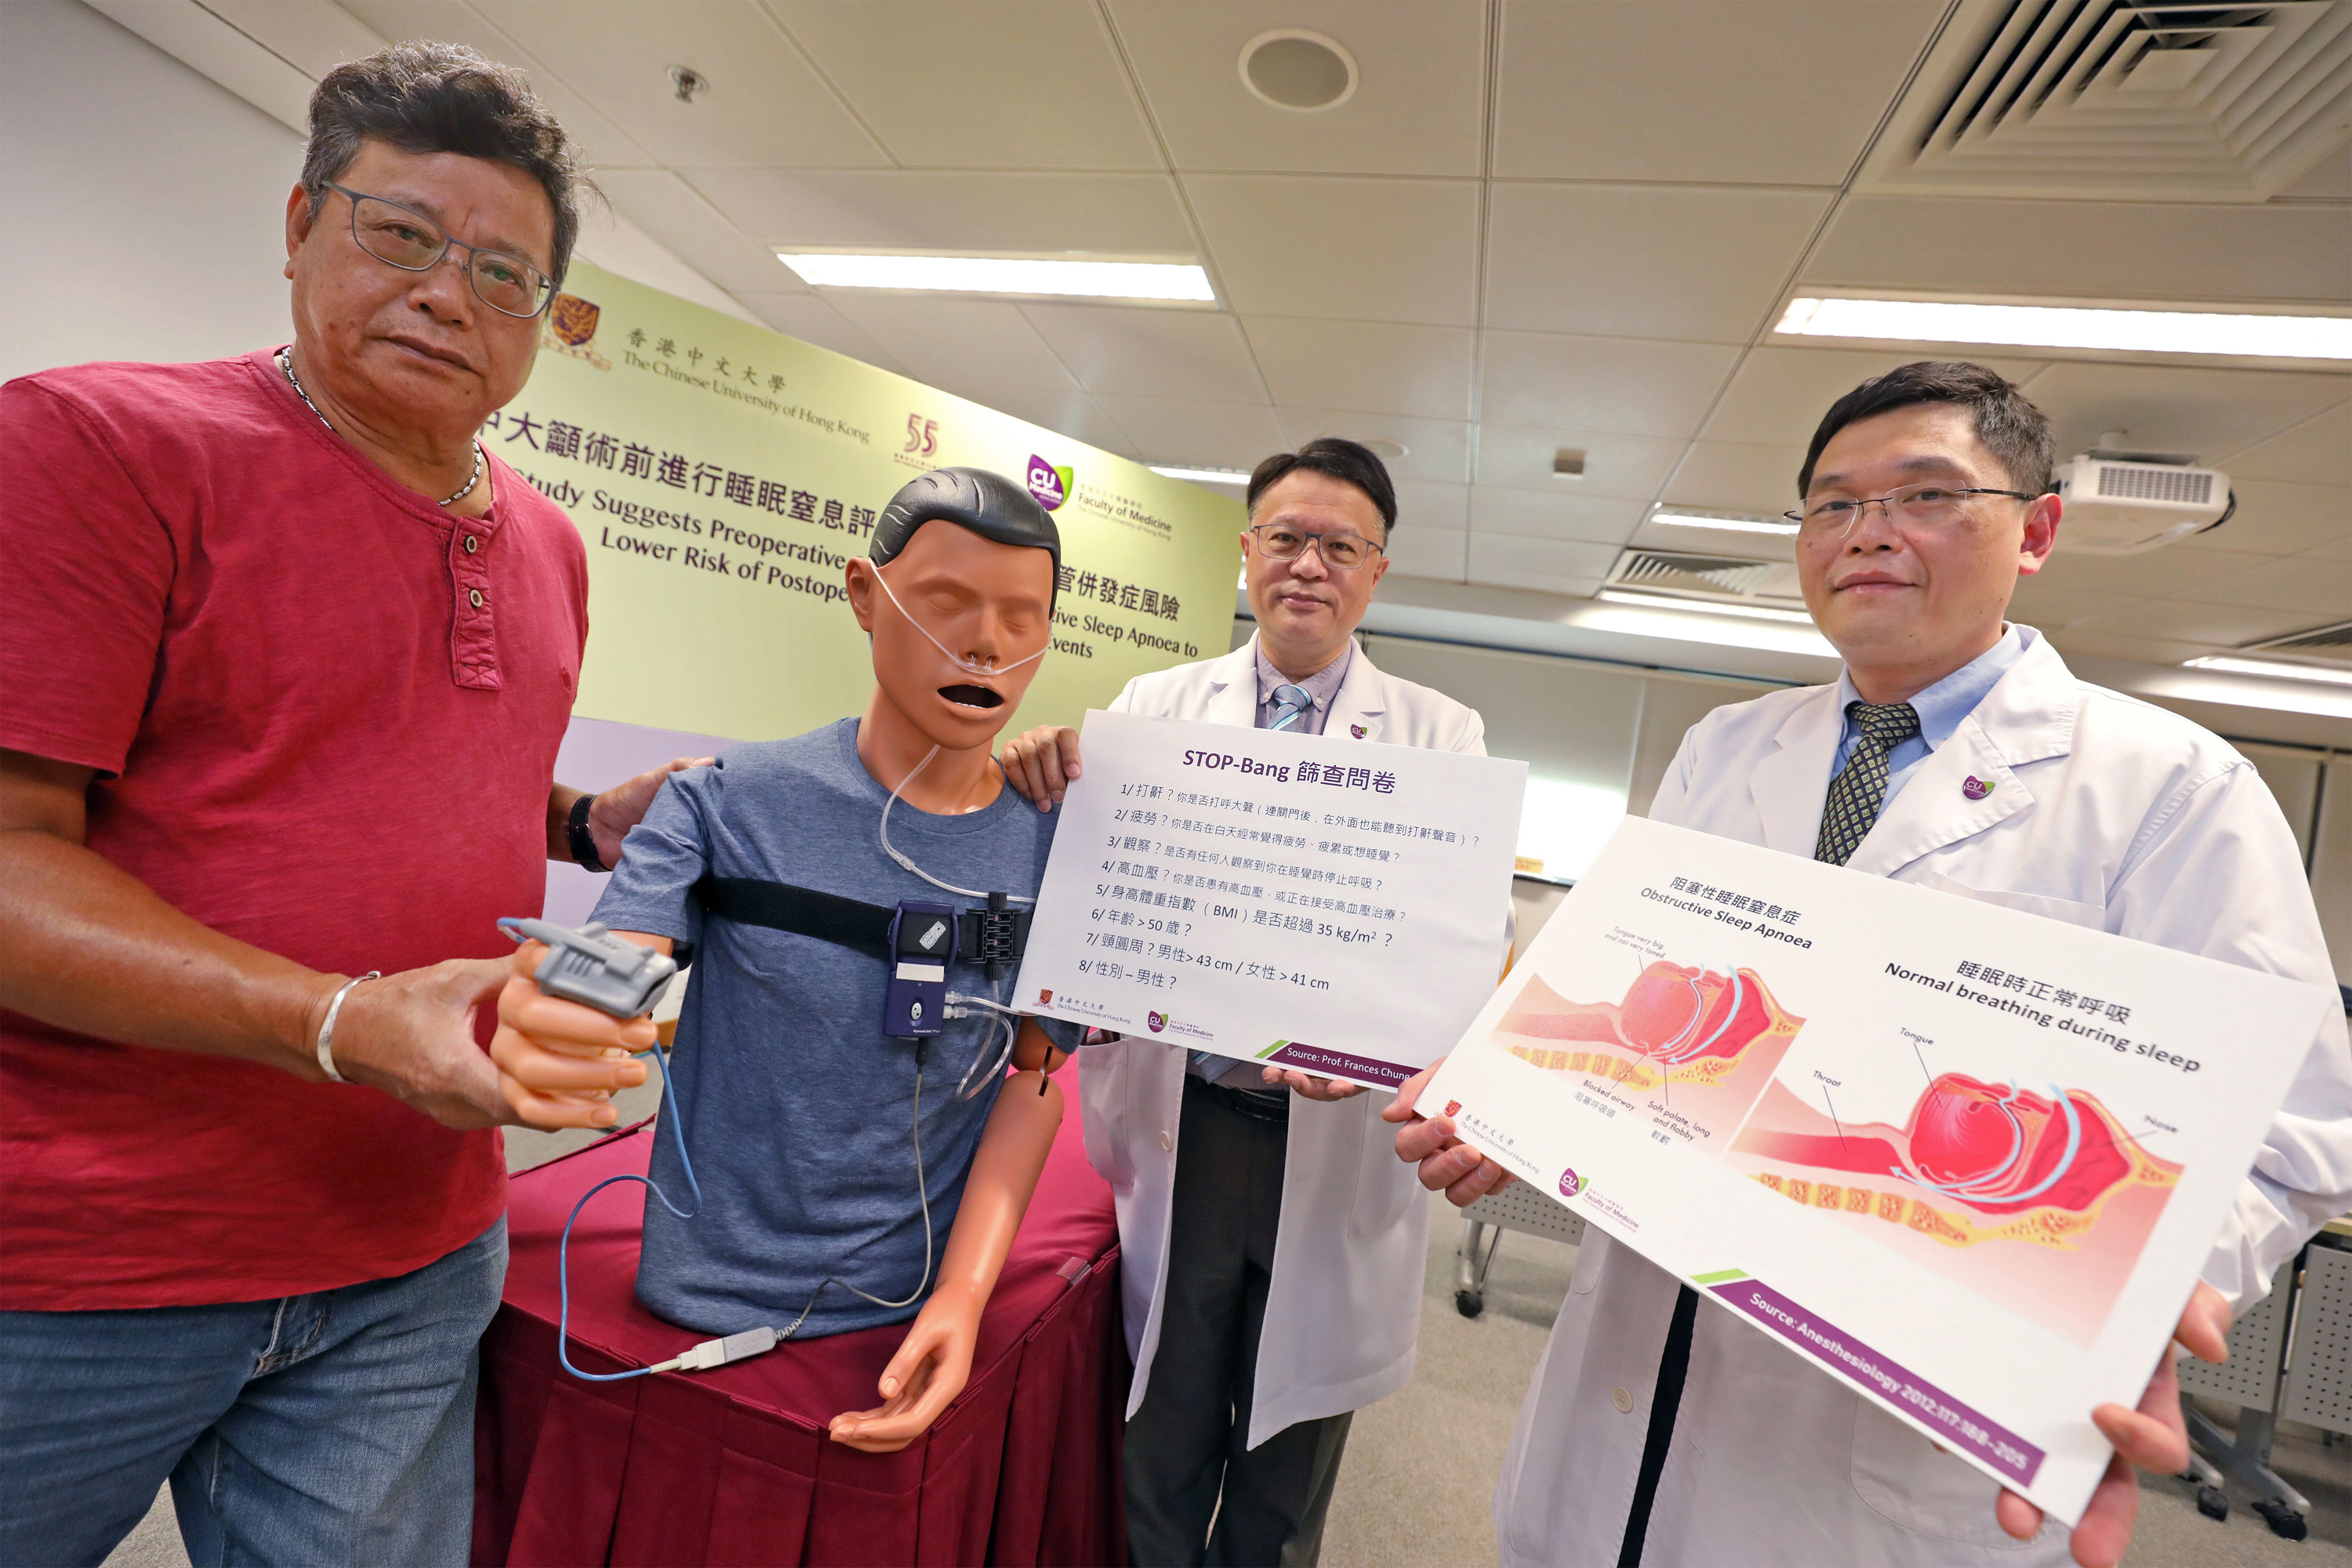 Mr. CHEUNG (left) received sleep test before his knee surgery last year and was diagnosed with severe OSA. He started OSA treatment and the frequencies of snoring and arousals have dropped drastically.